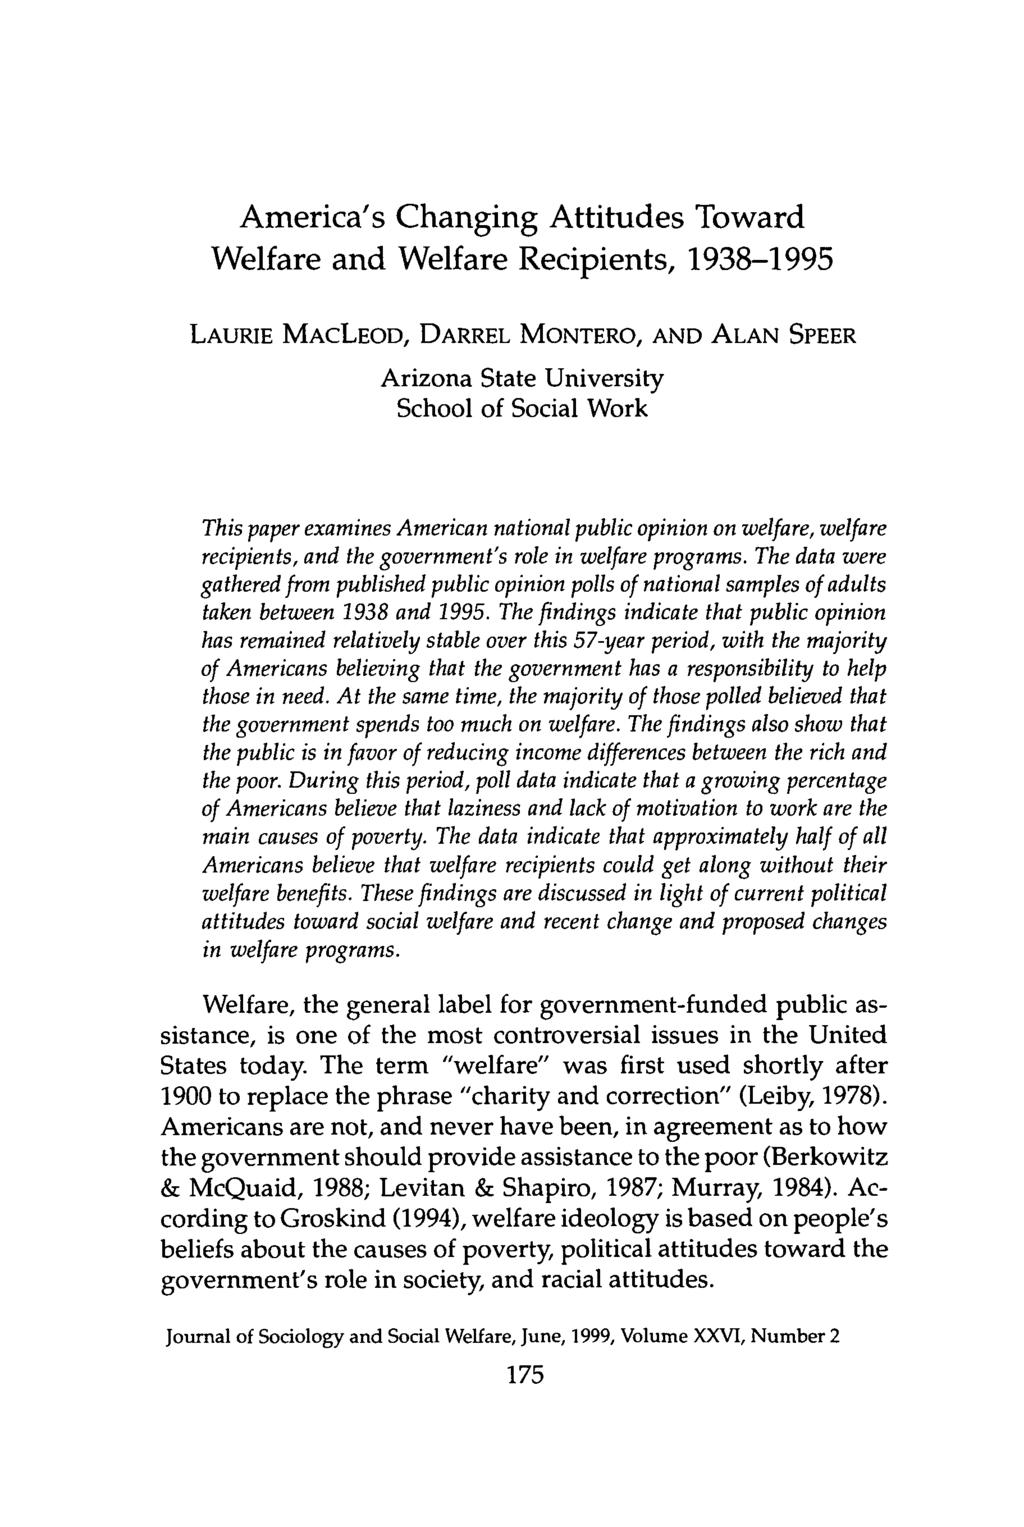 America's Changing Attitudes Toward Welfare and Welfare Recipients, 1938-1995 LAURIE MACLEOD, DARREL MONTERO, AND ALAN SPEER Arizona State University School of Social Work This paper examines